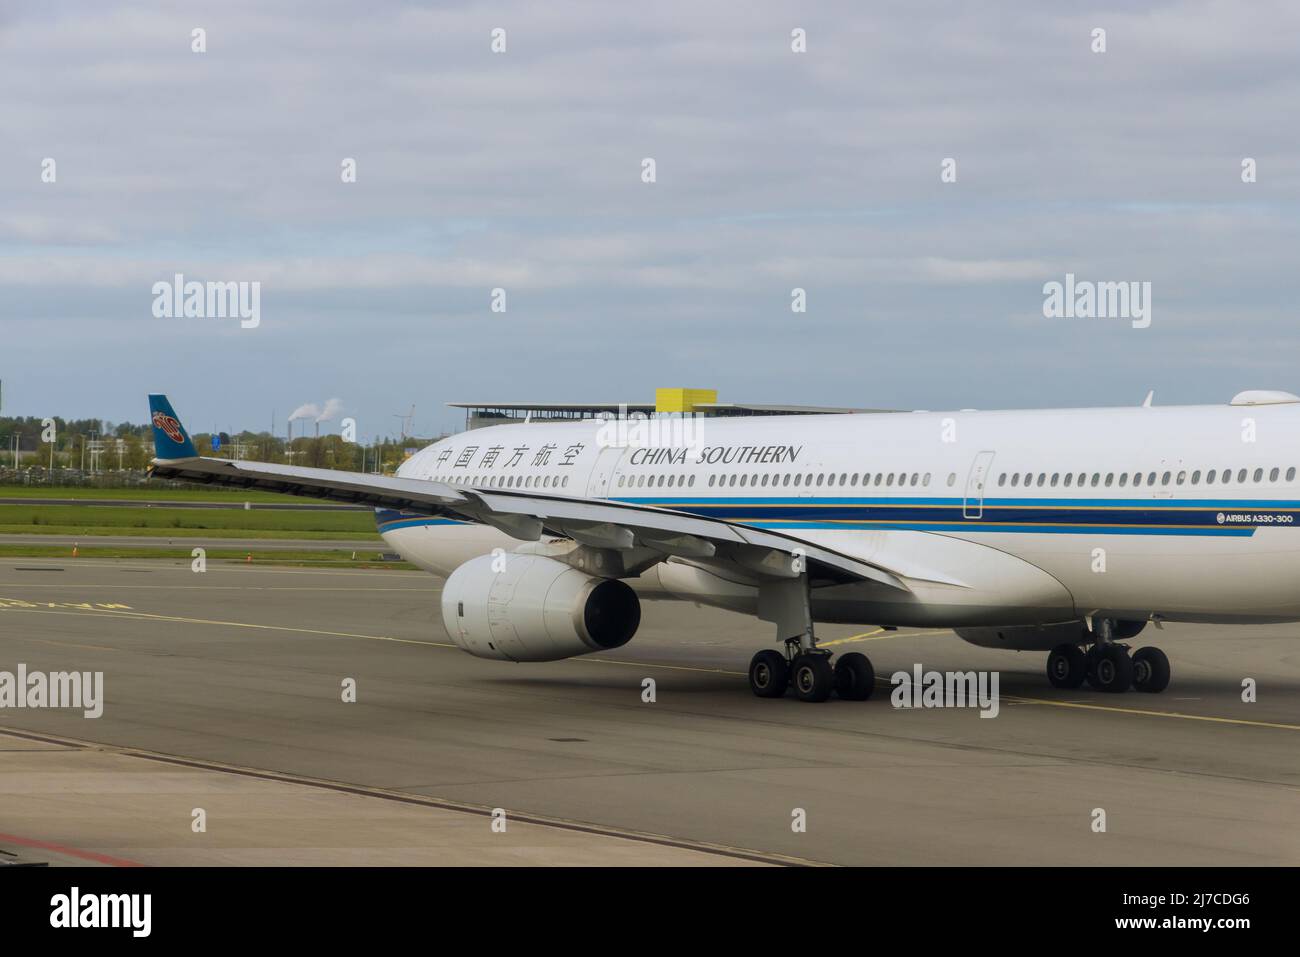 China Southern Airlines plane Airbus A330 International Airport Stock Photo